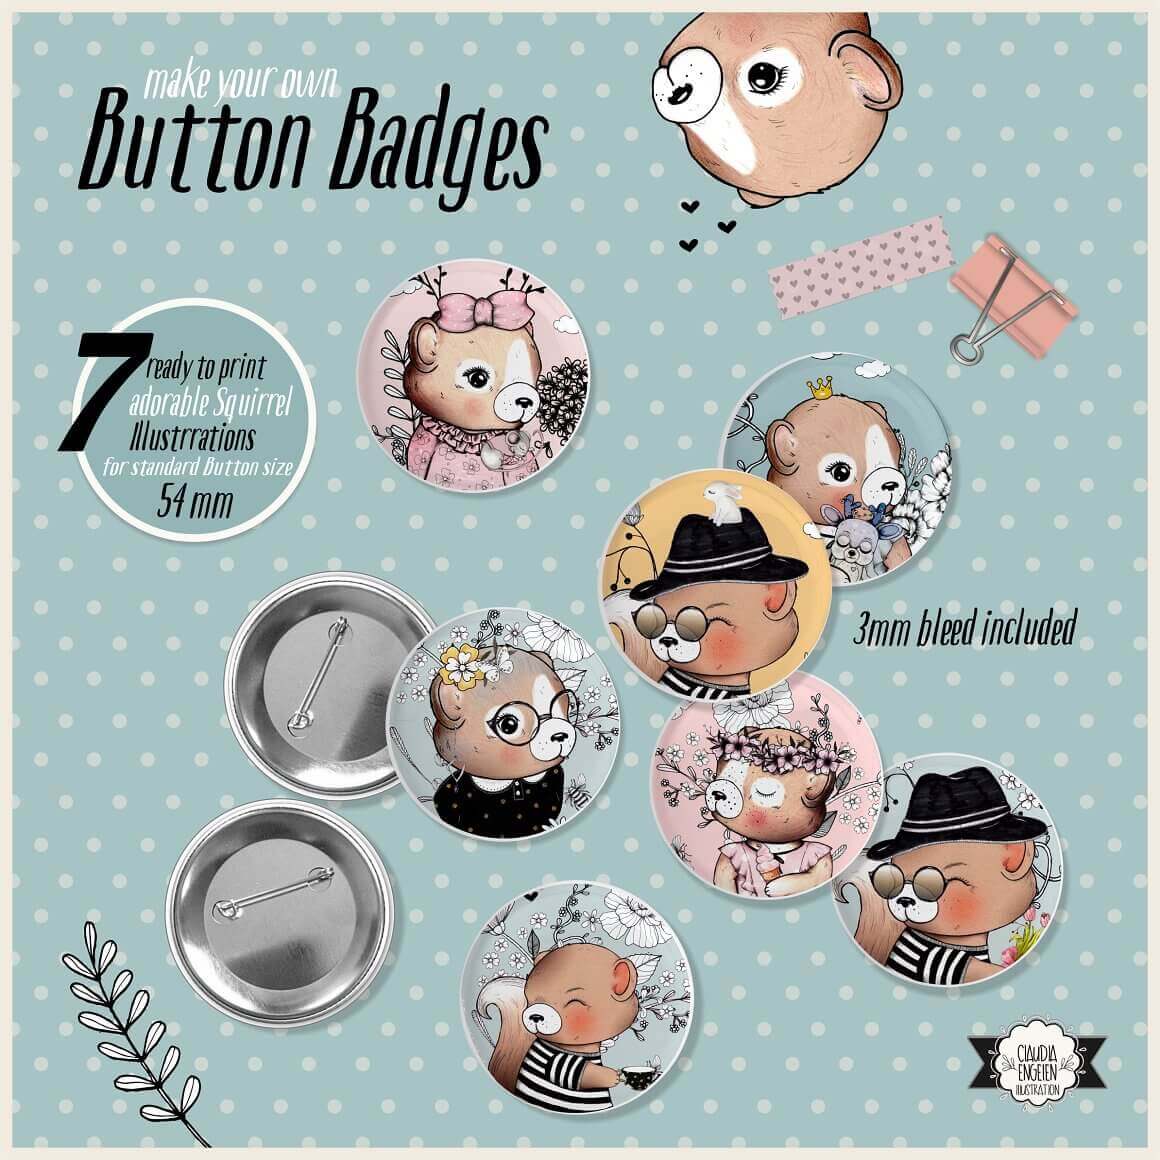 Make your own Button Badges with Squirrel Image.